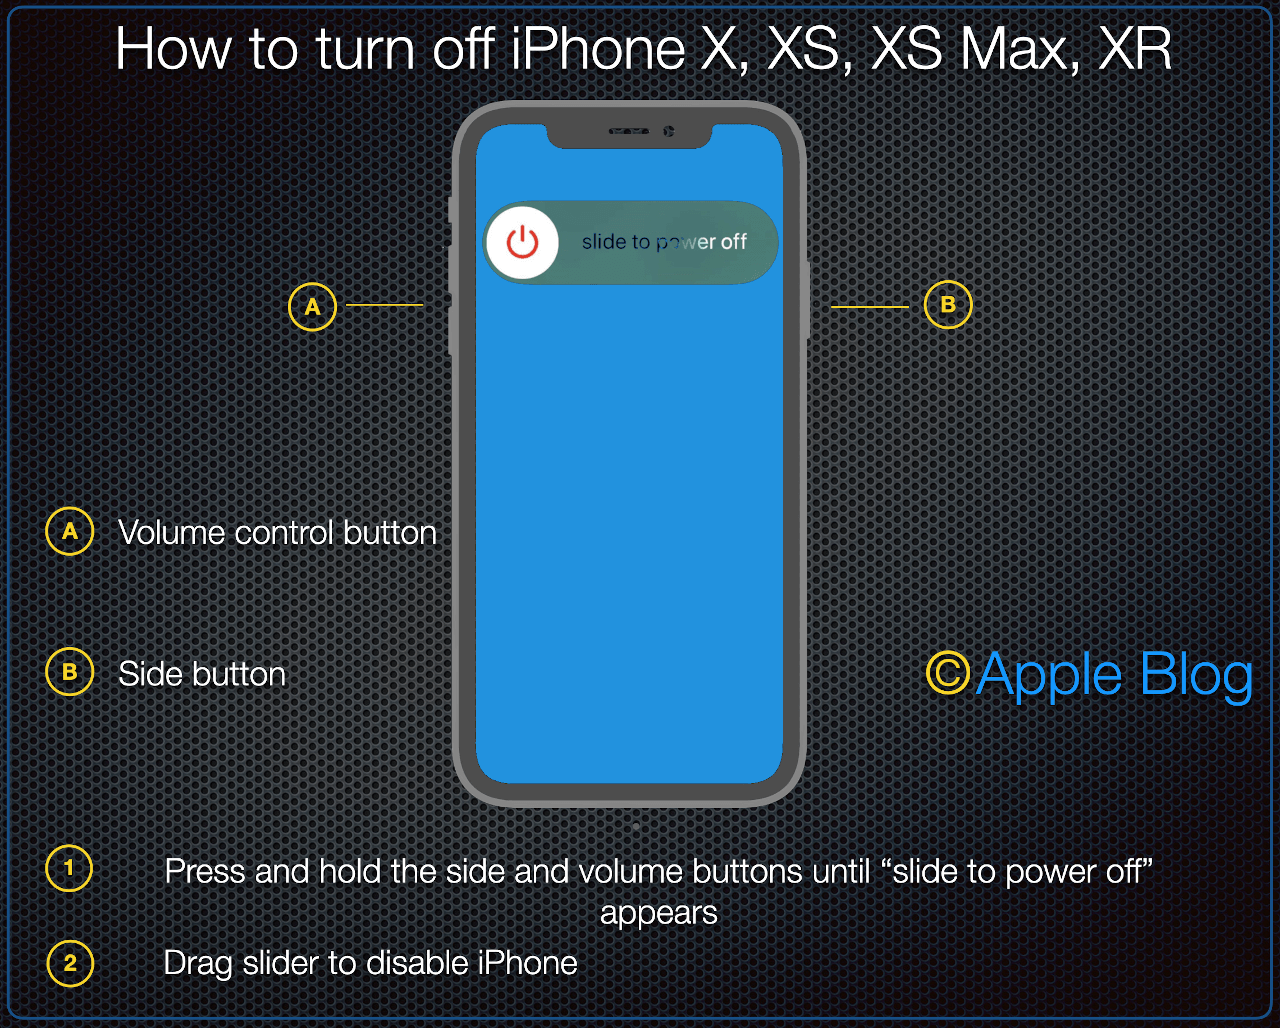 How to turn off iPhone 11, 11 Pro, X, XR, XS, Max, 8, Plus